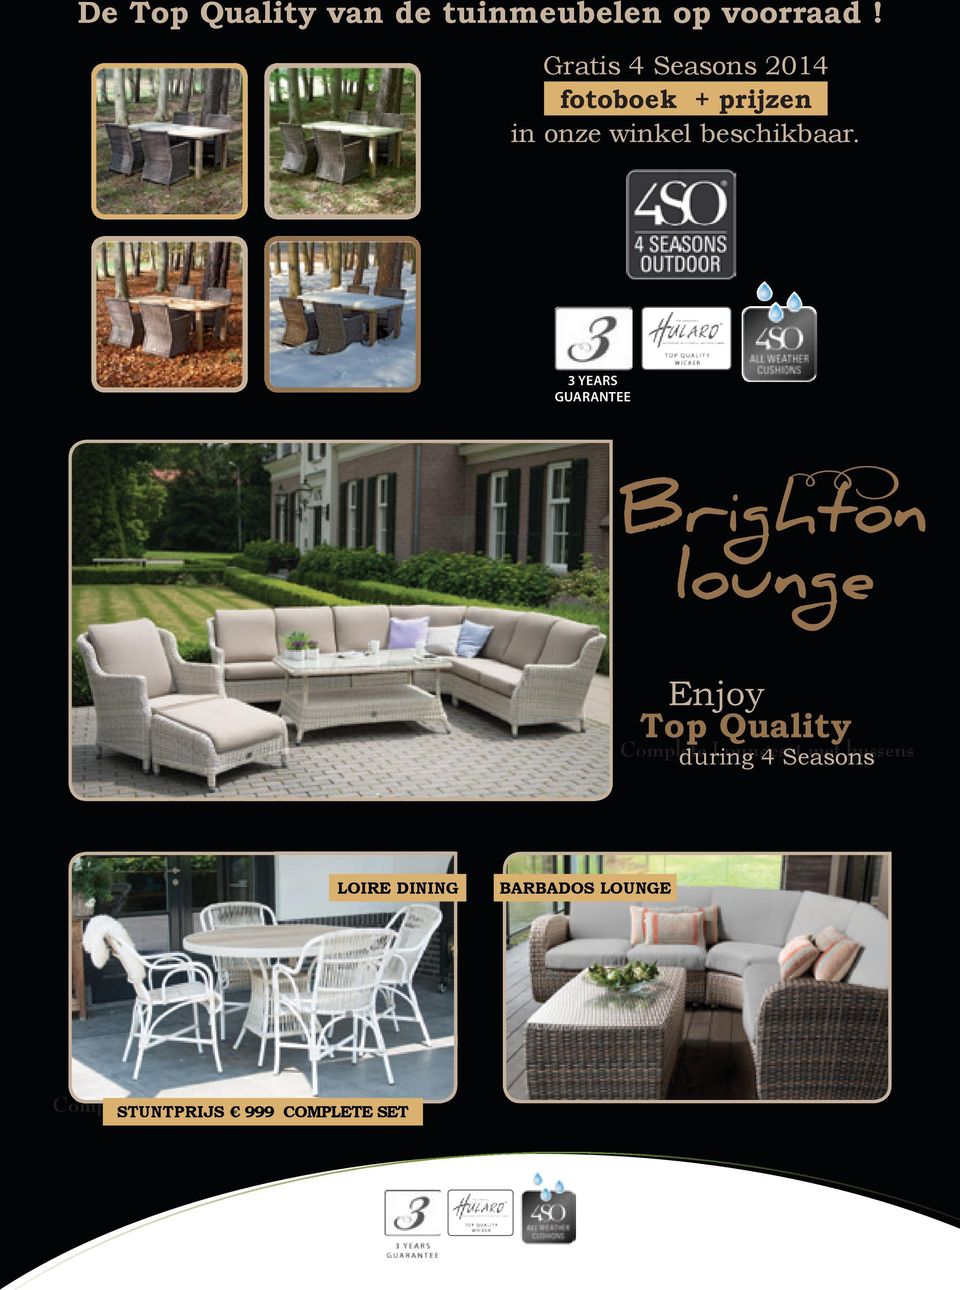 3 YEARS GUARANTEE Brighton lounge Enjoy Top Quality Complete during